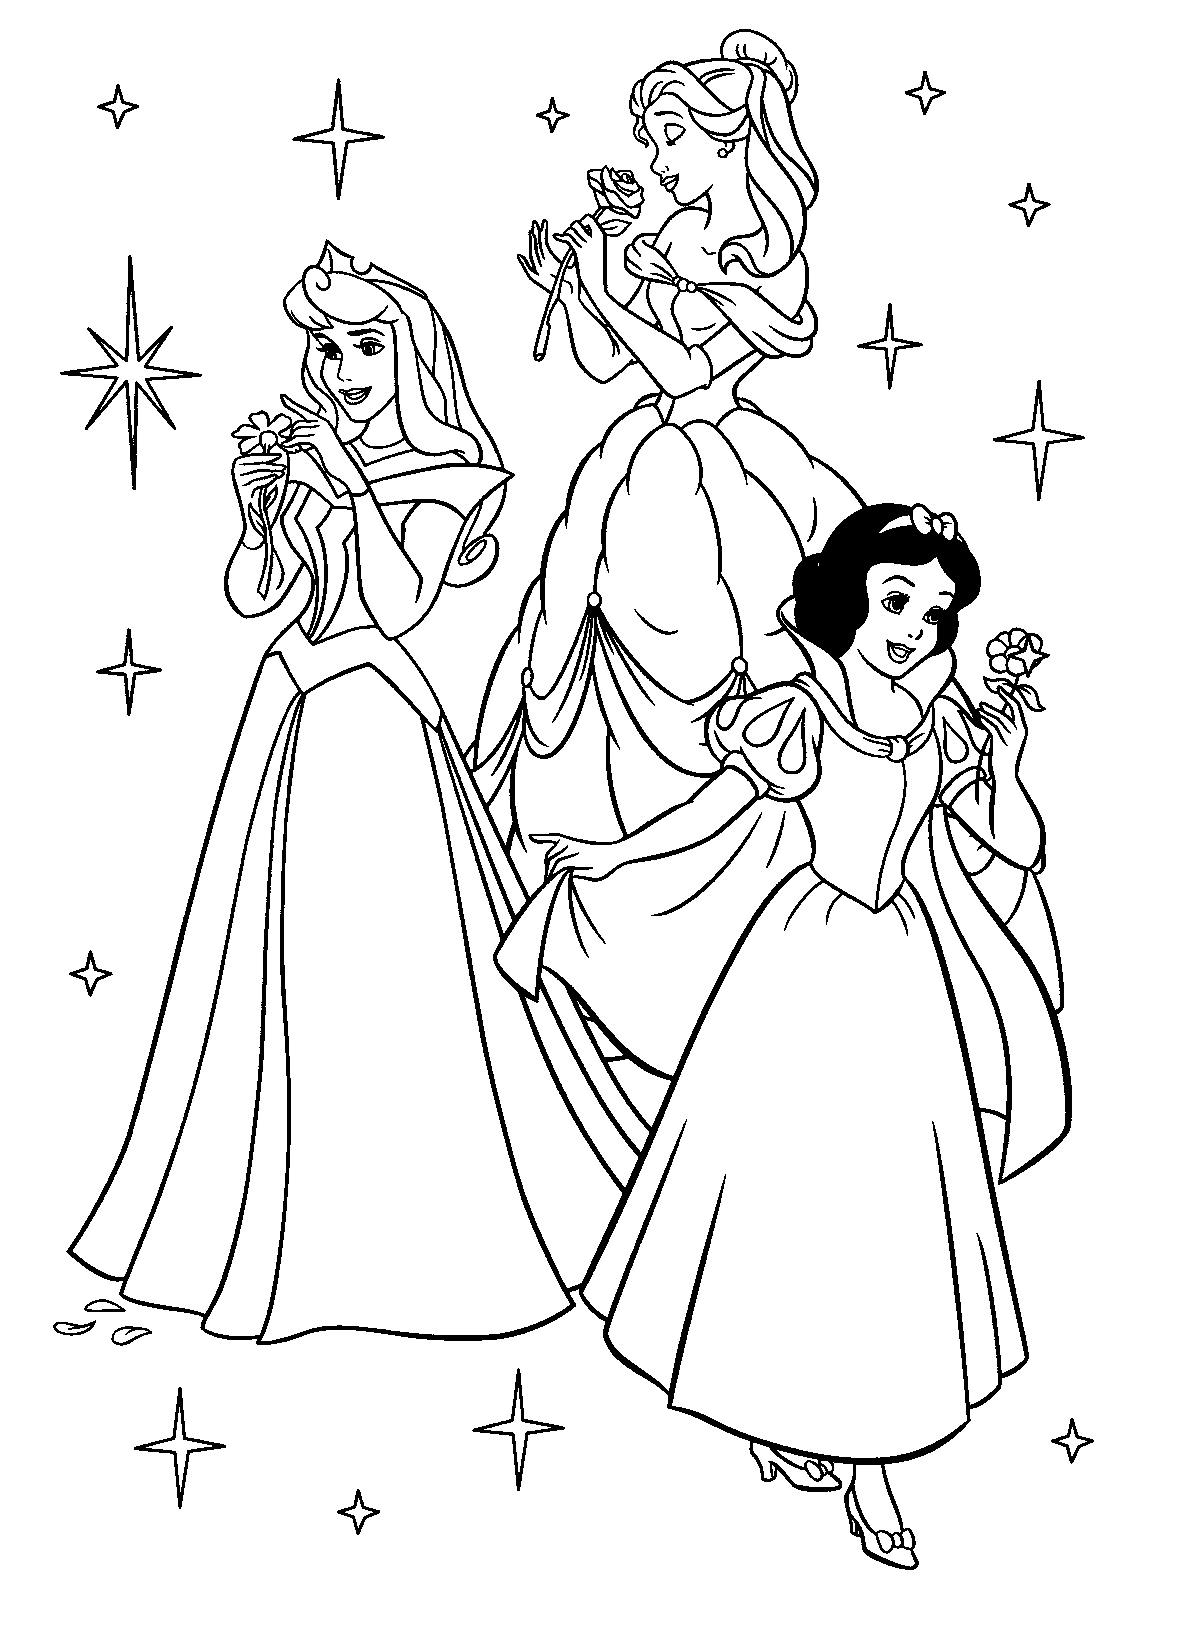 Disney Princess Coloring Pages - Coloring Pages | Wallpapers | Photos